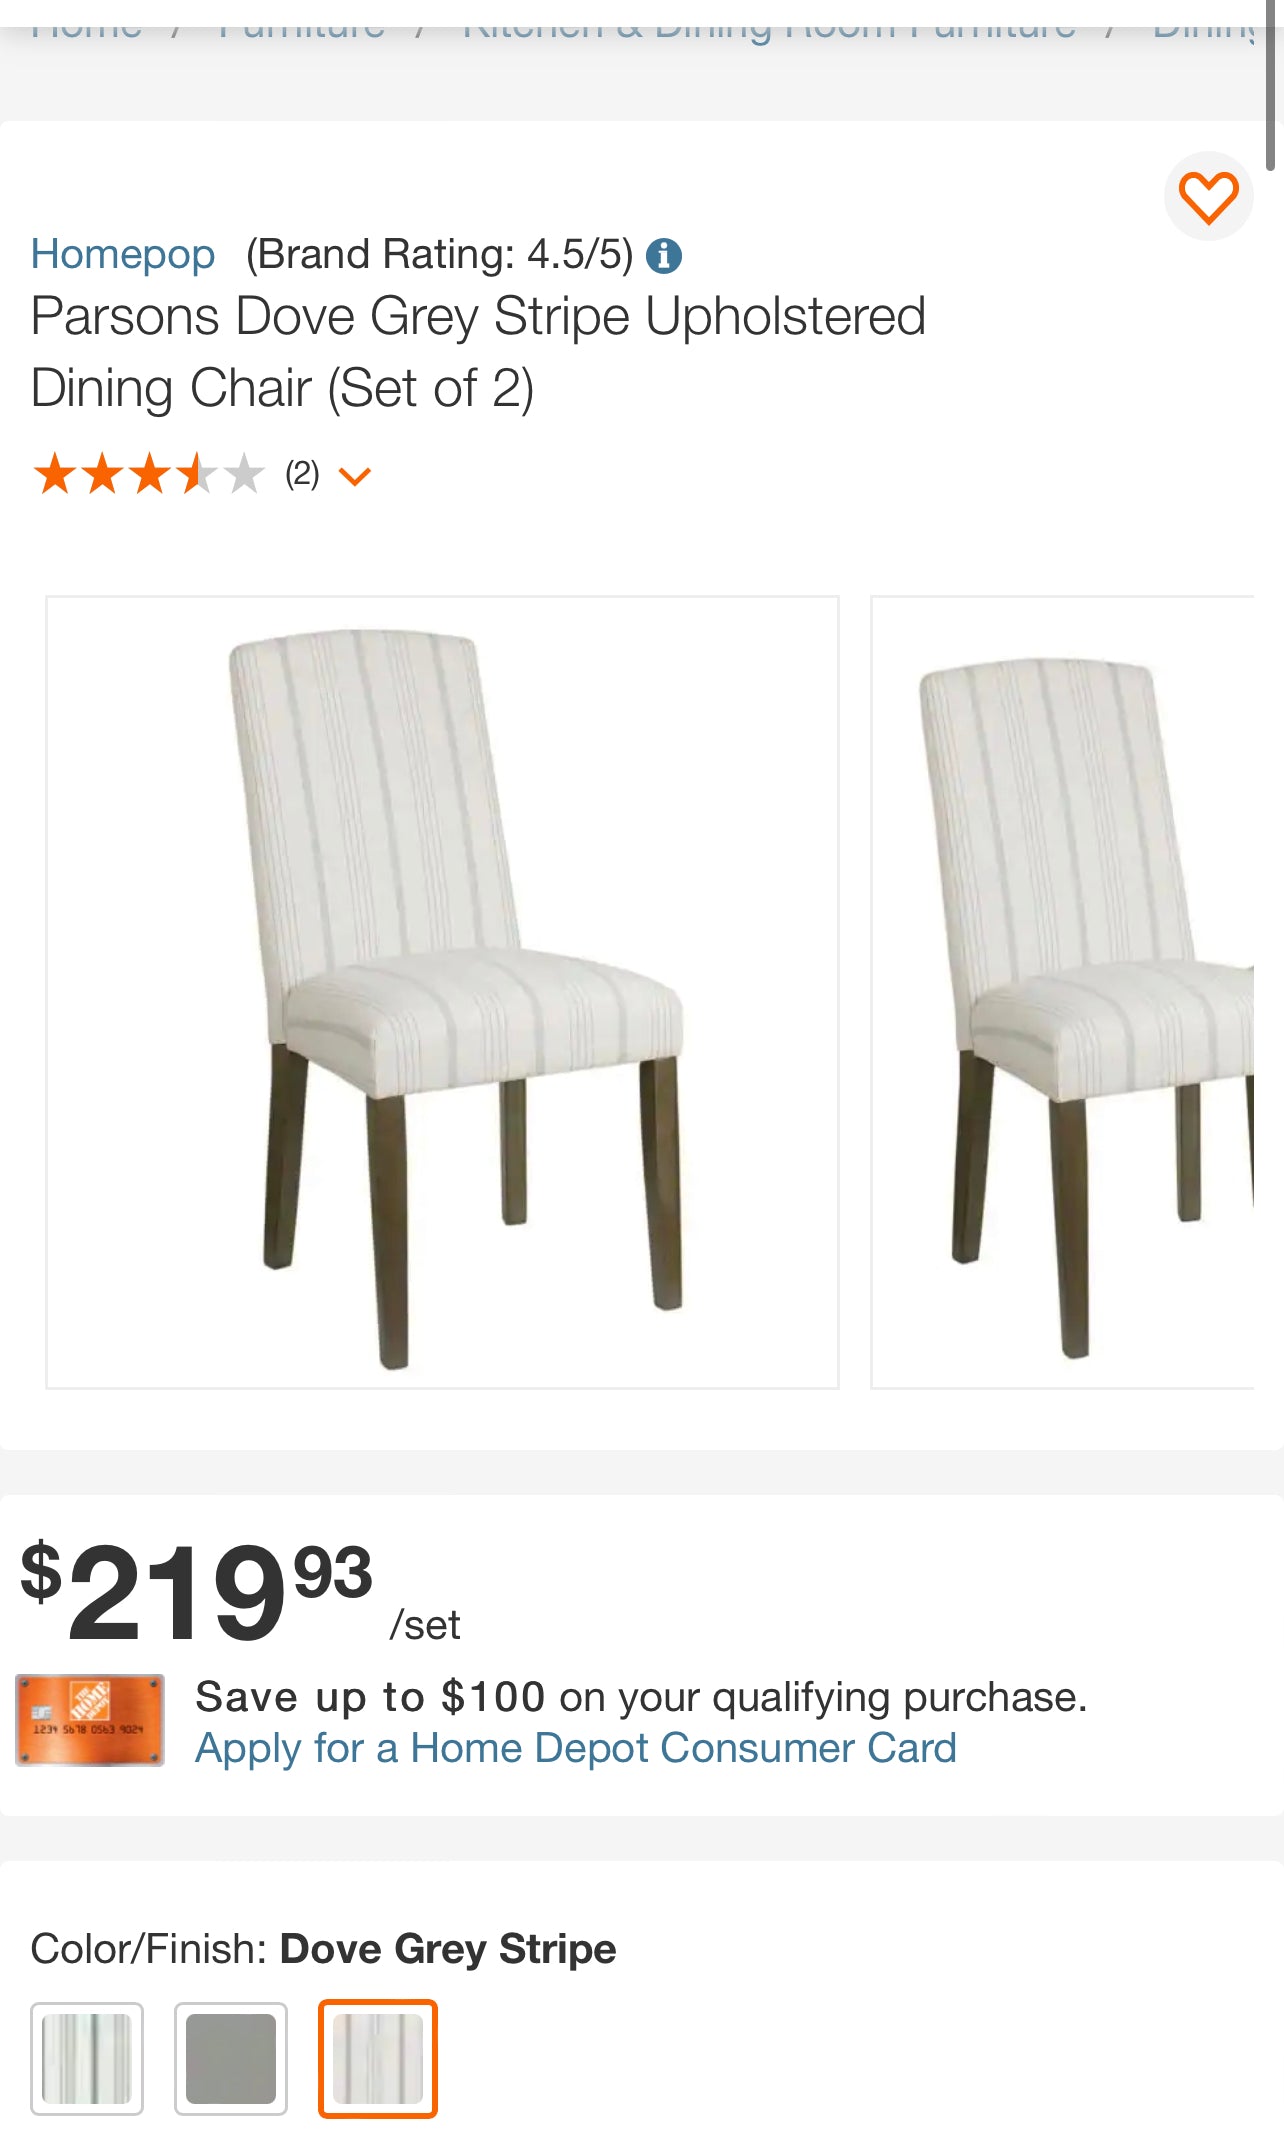 Parsons Dove Grey Stripe Upholstered Dining Chair (Set of 2)